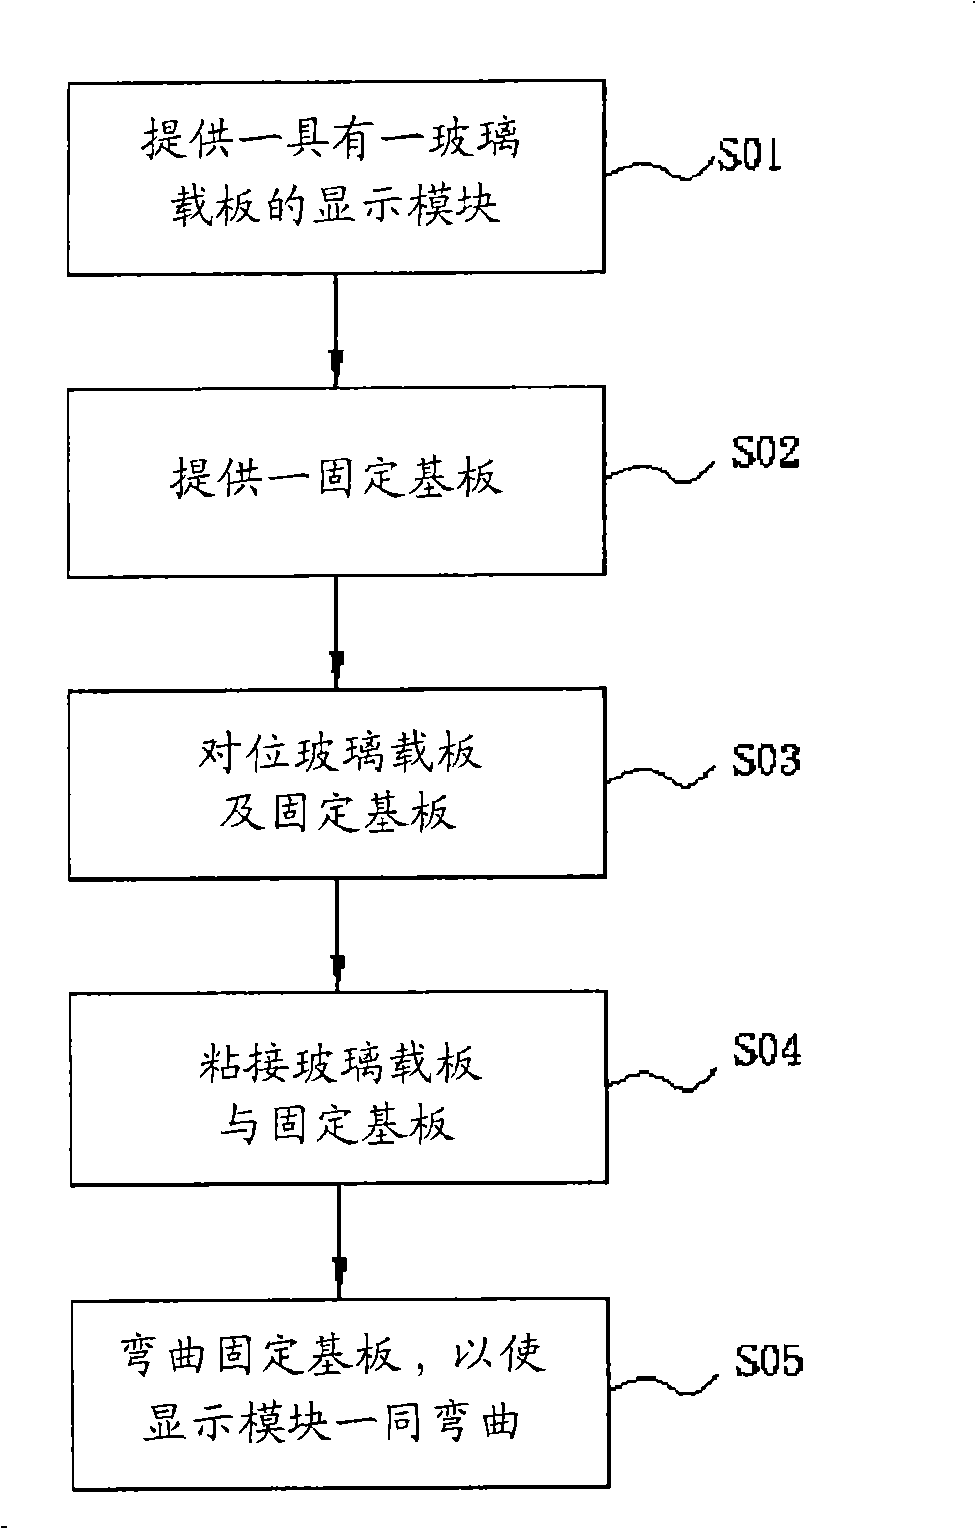 Curved face display panel and method of manufacture